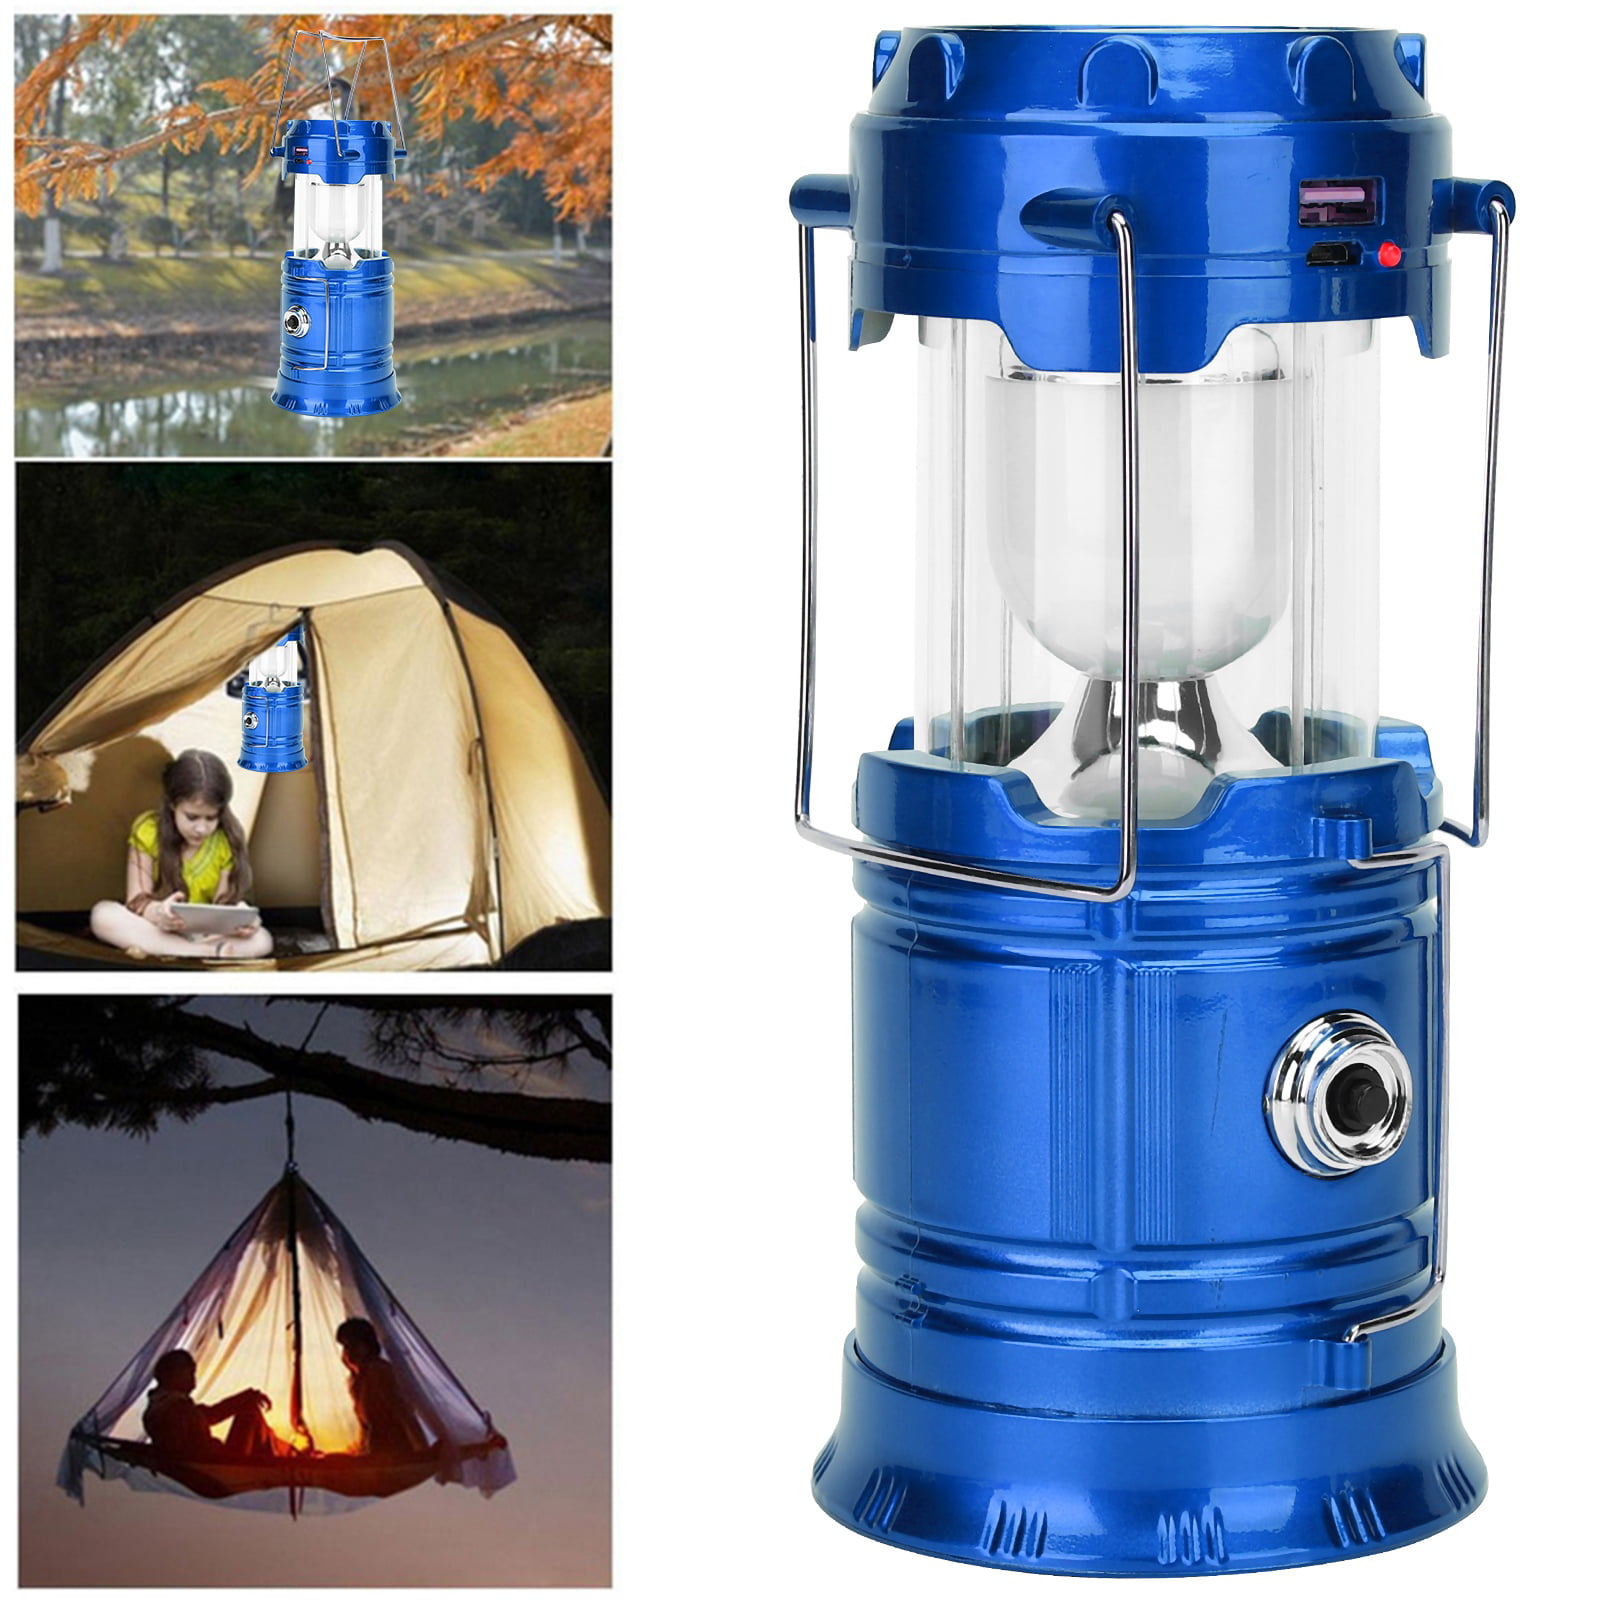 Rechargeable LED Camping Hiking Tent Light Portable Solar Lantern Torch US STOCK 